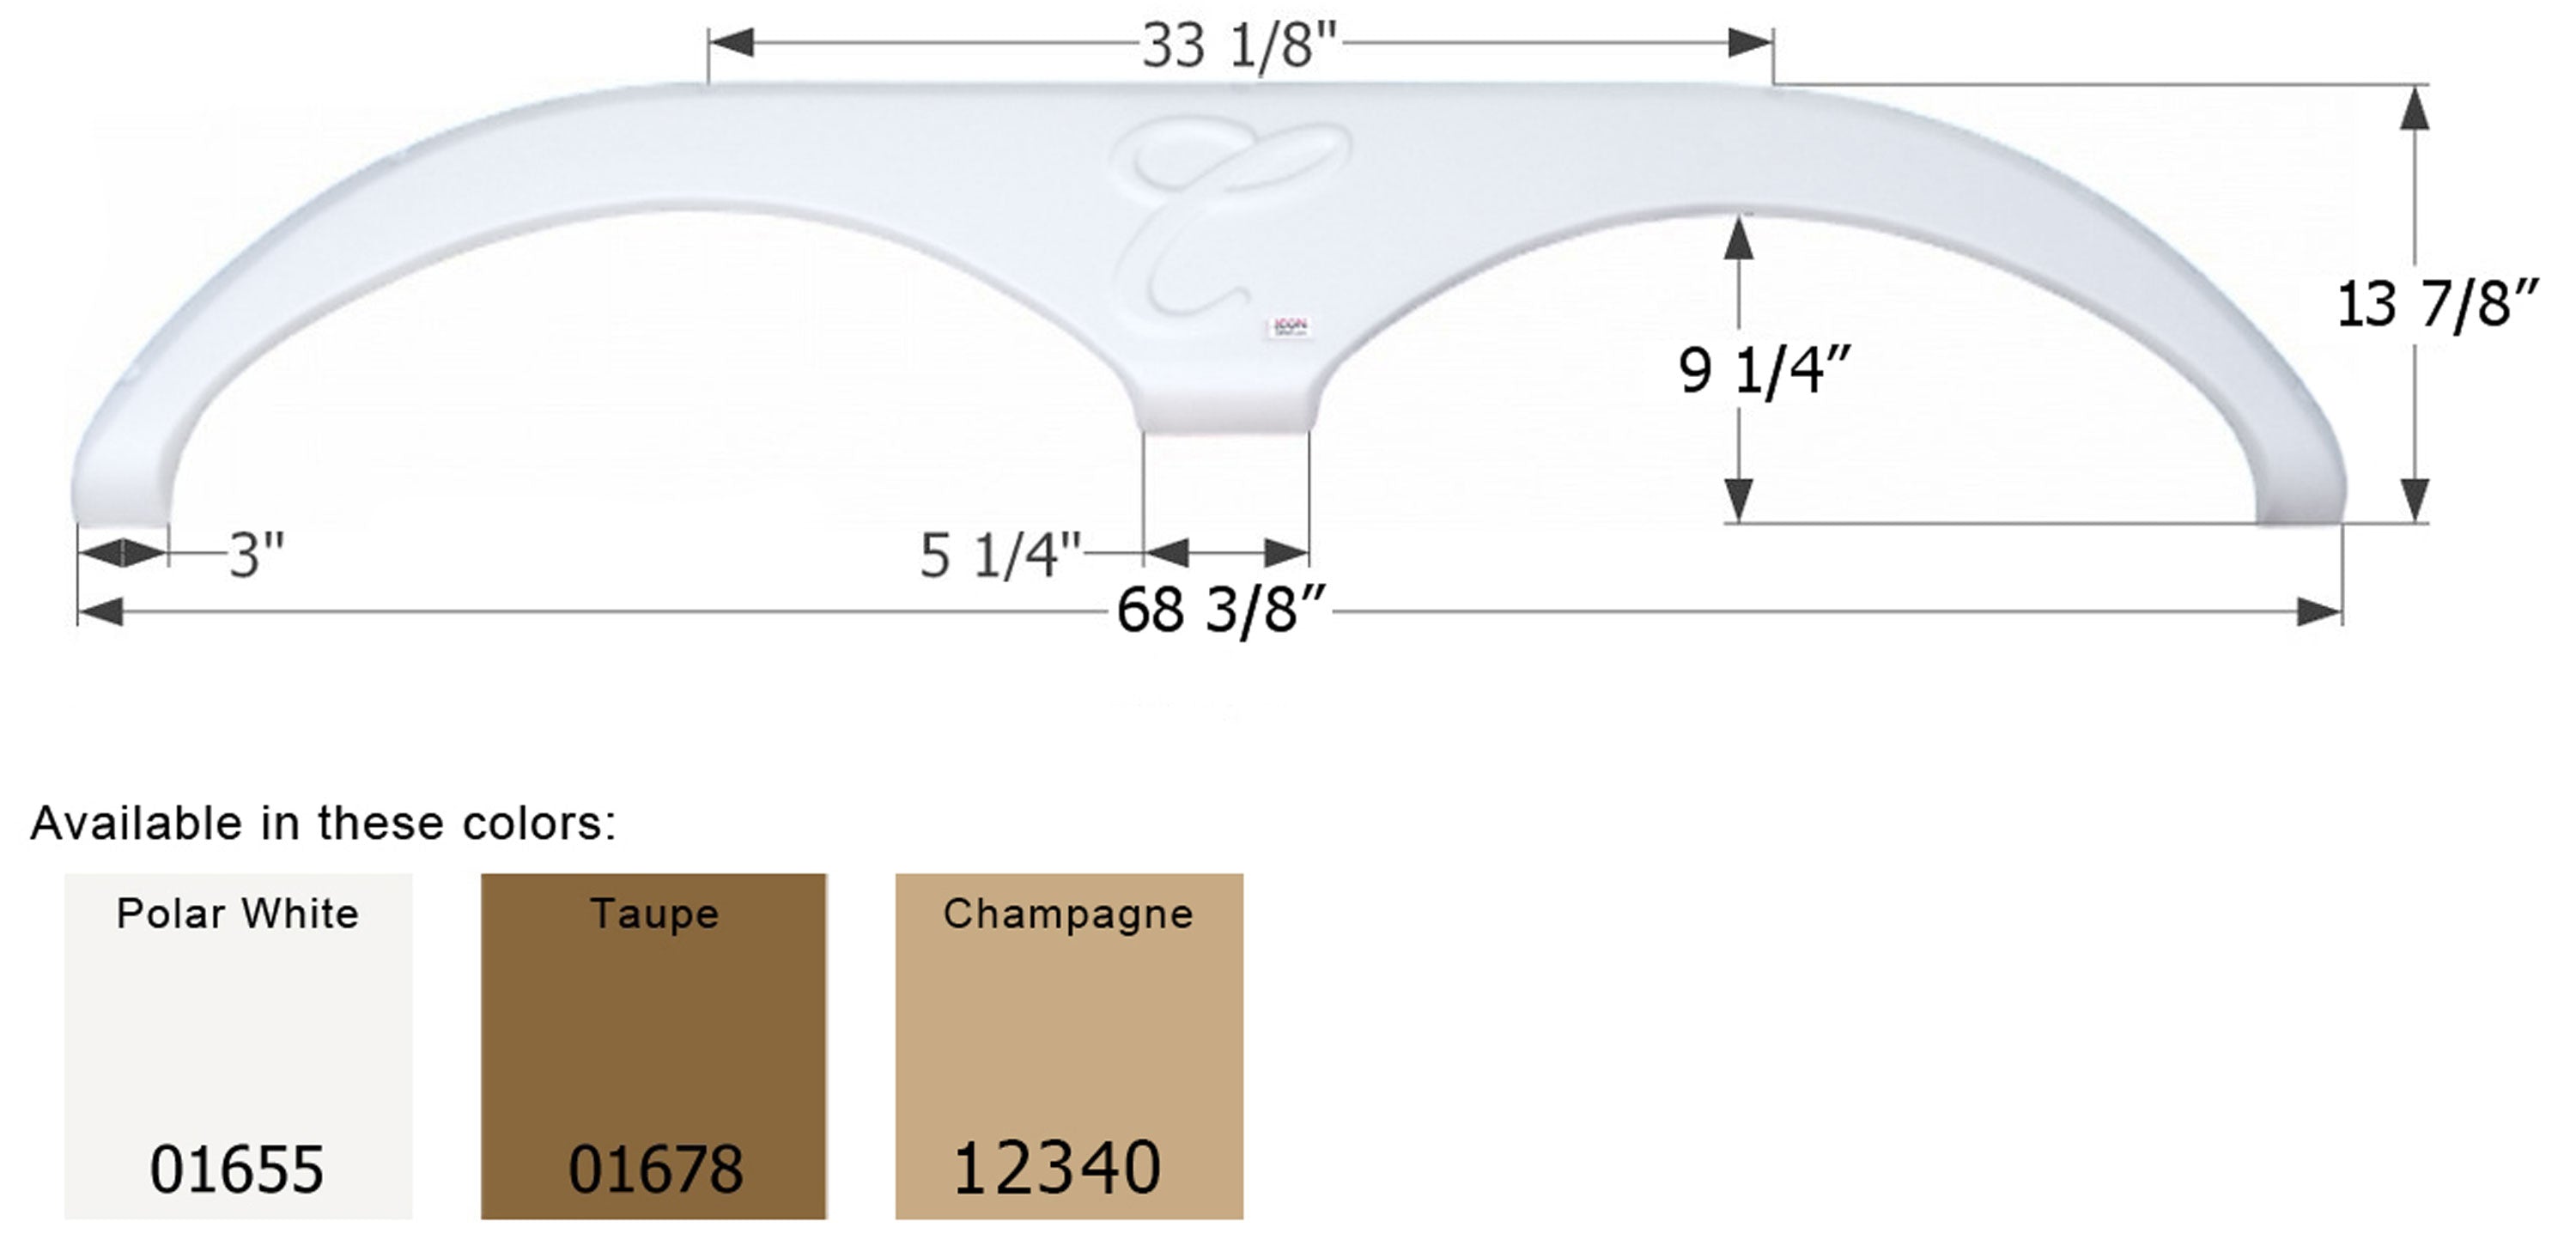 Icon 12340 Tandem Axle Fender Skirt FS785 for Forest River Cardinal 5th Wheel Travel Trailer - Champagne